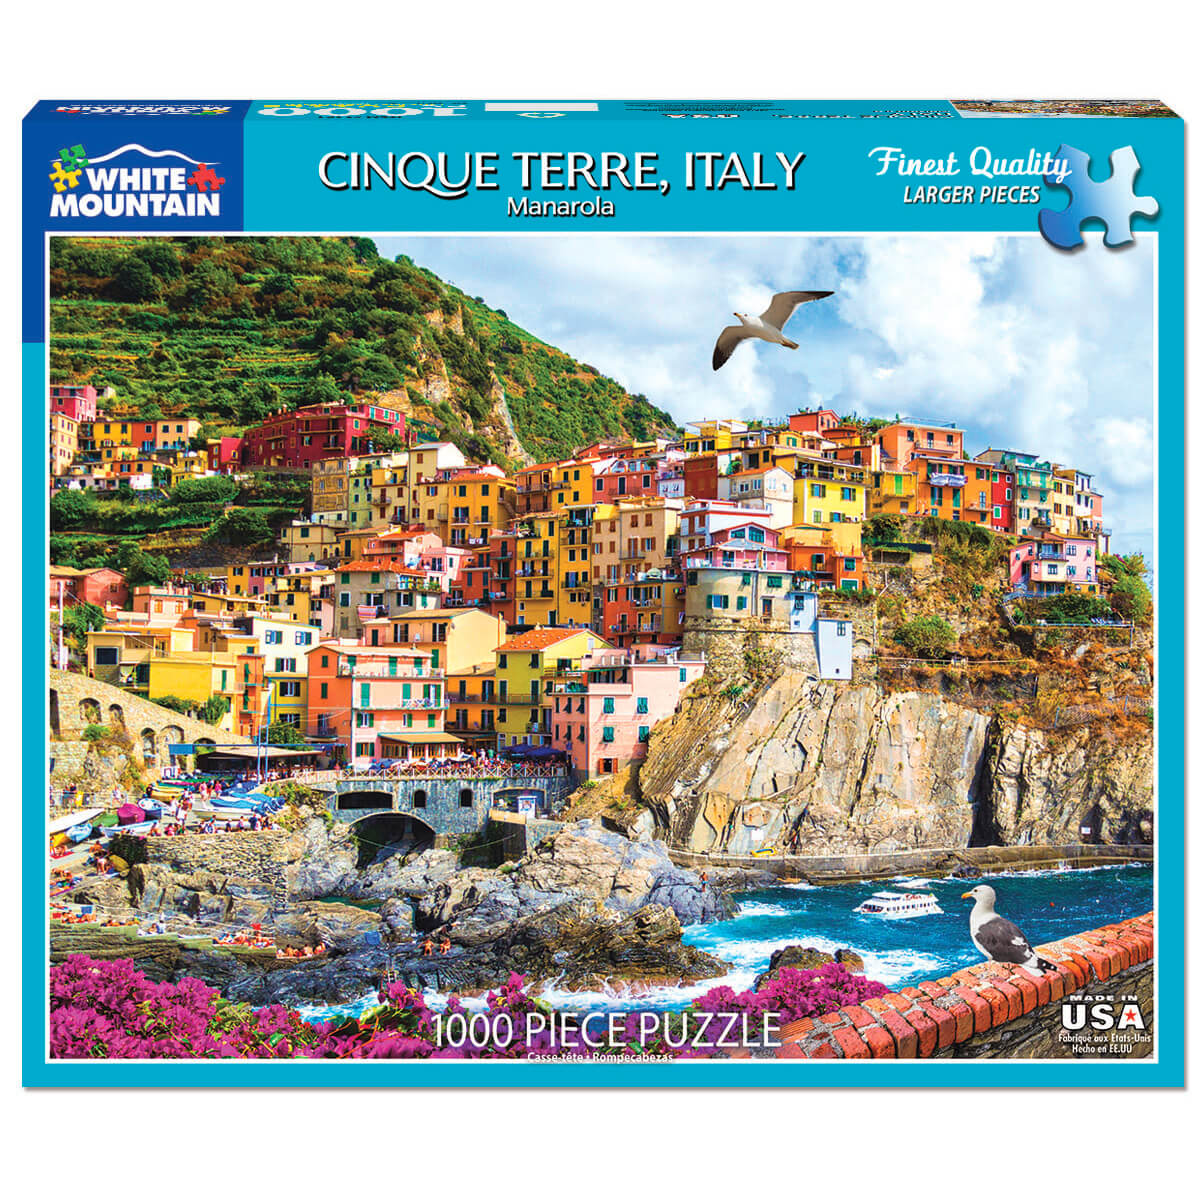 White Mountain Puzzles Cinque Terre Italy 1000 Piece Jigsaw Puzzle